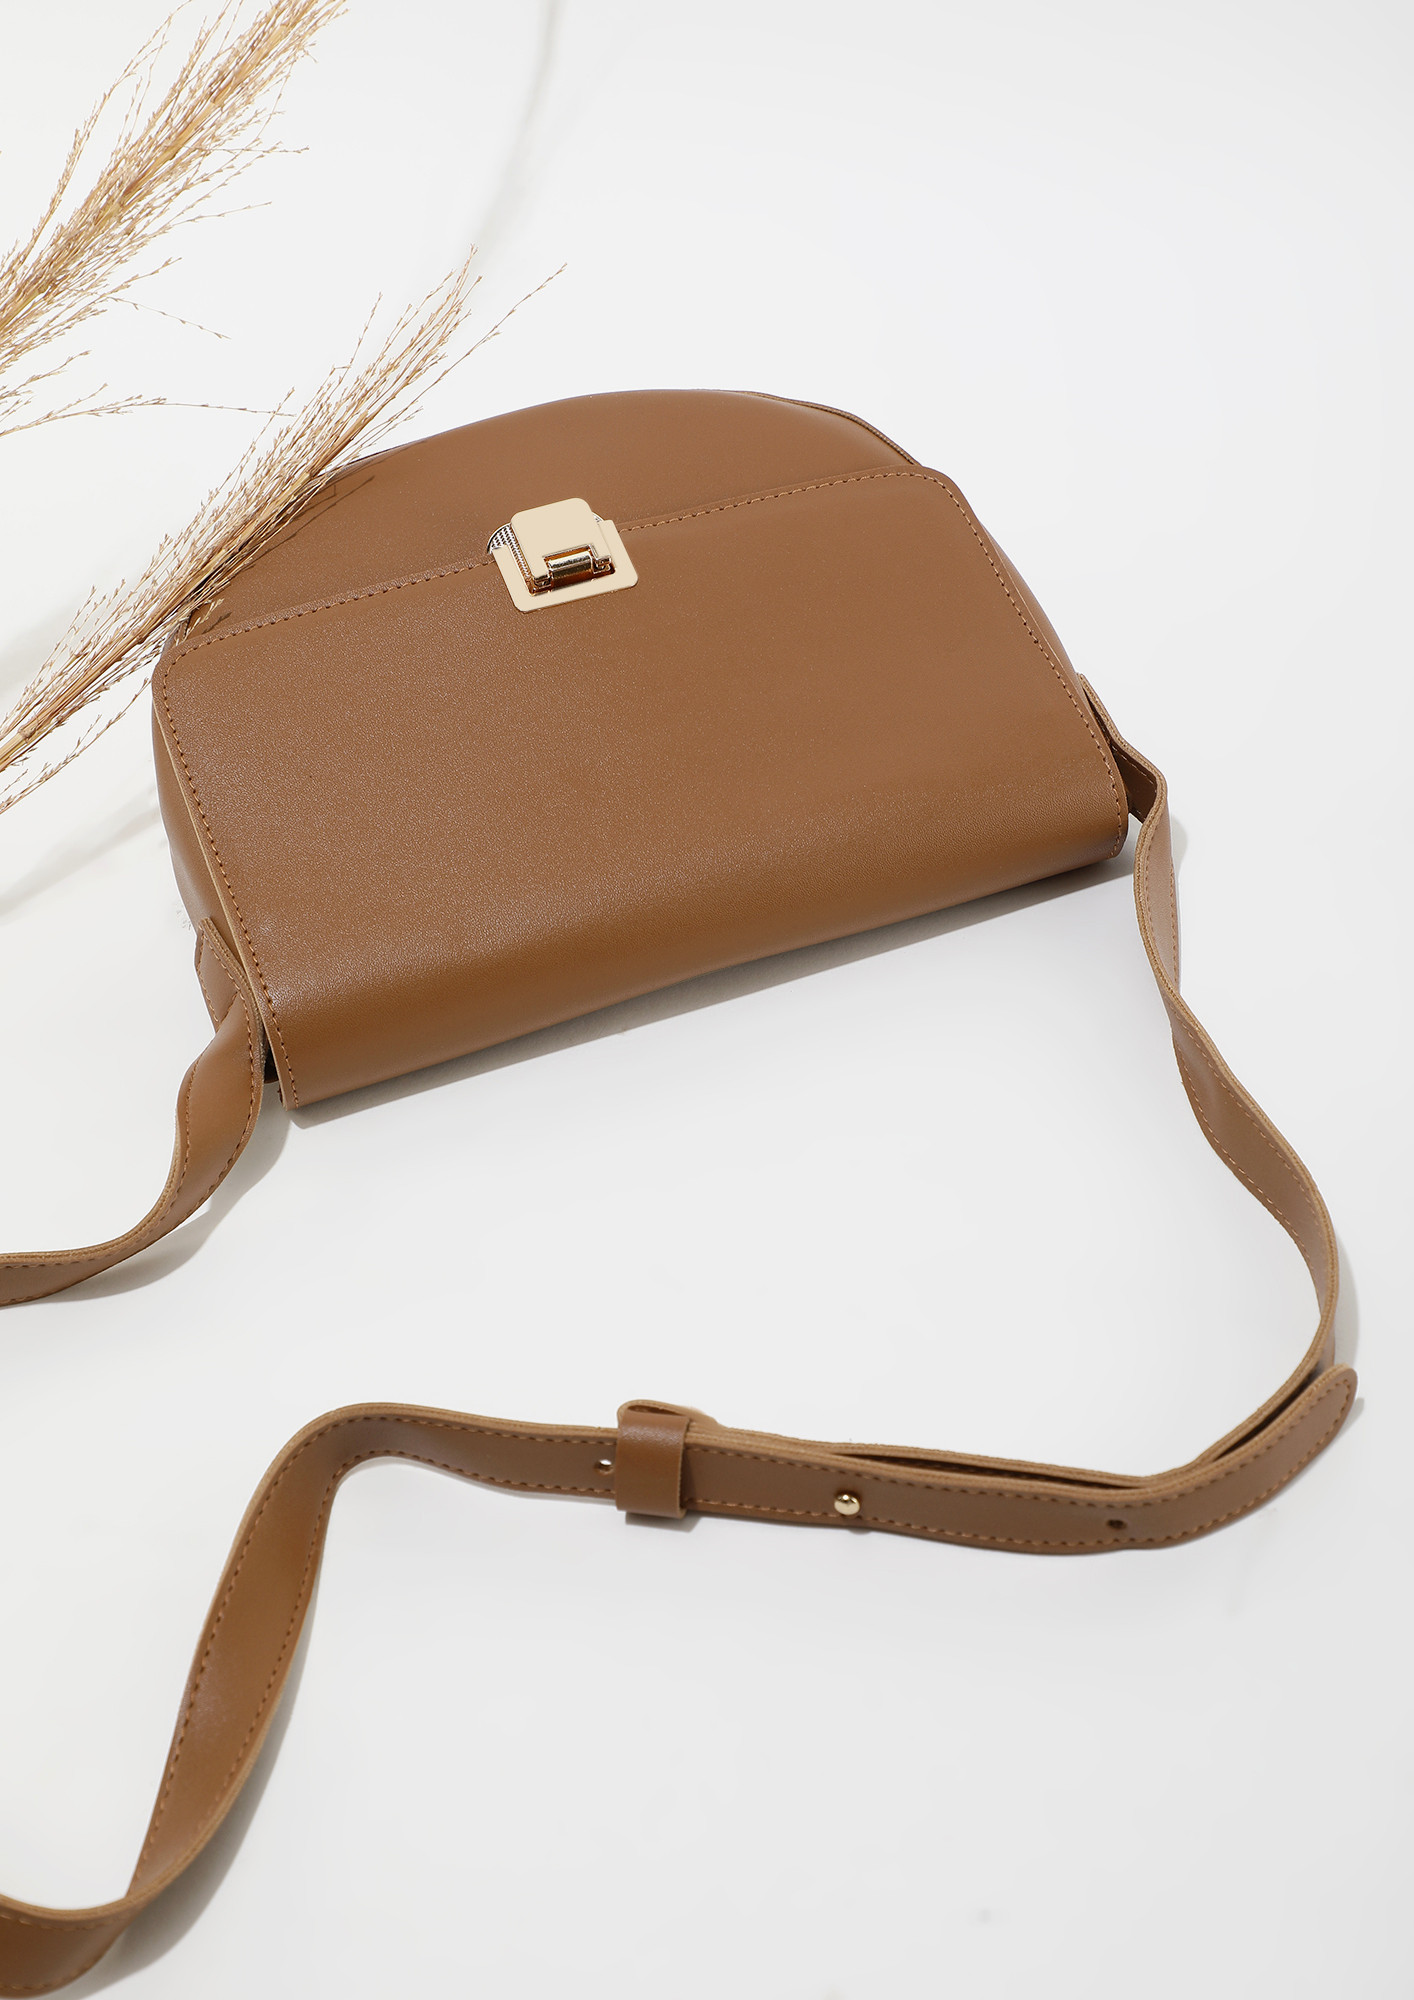 ALL PKACES APPROVED BROWN SLING BAG